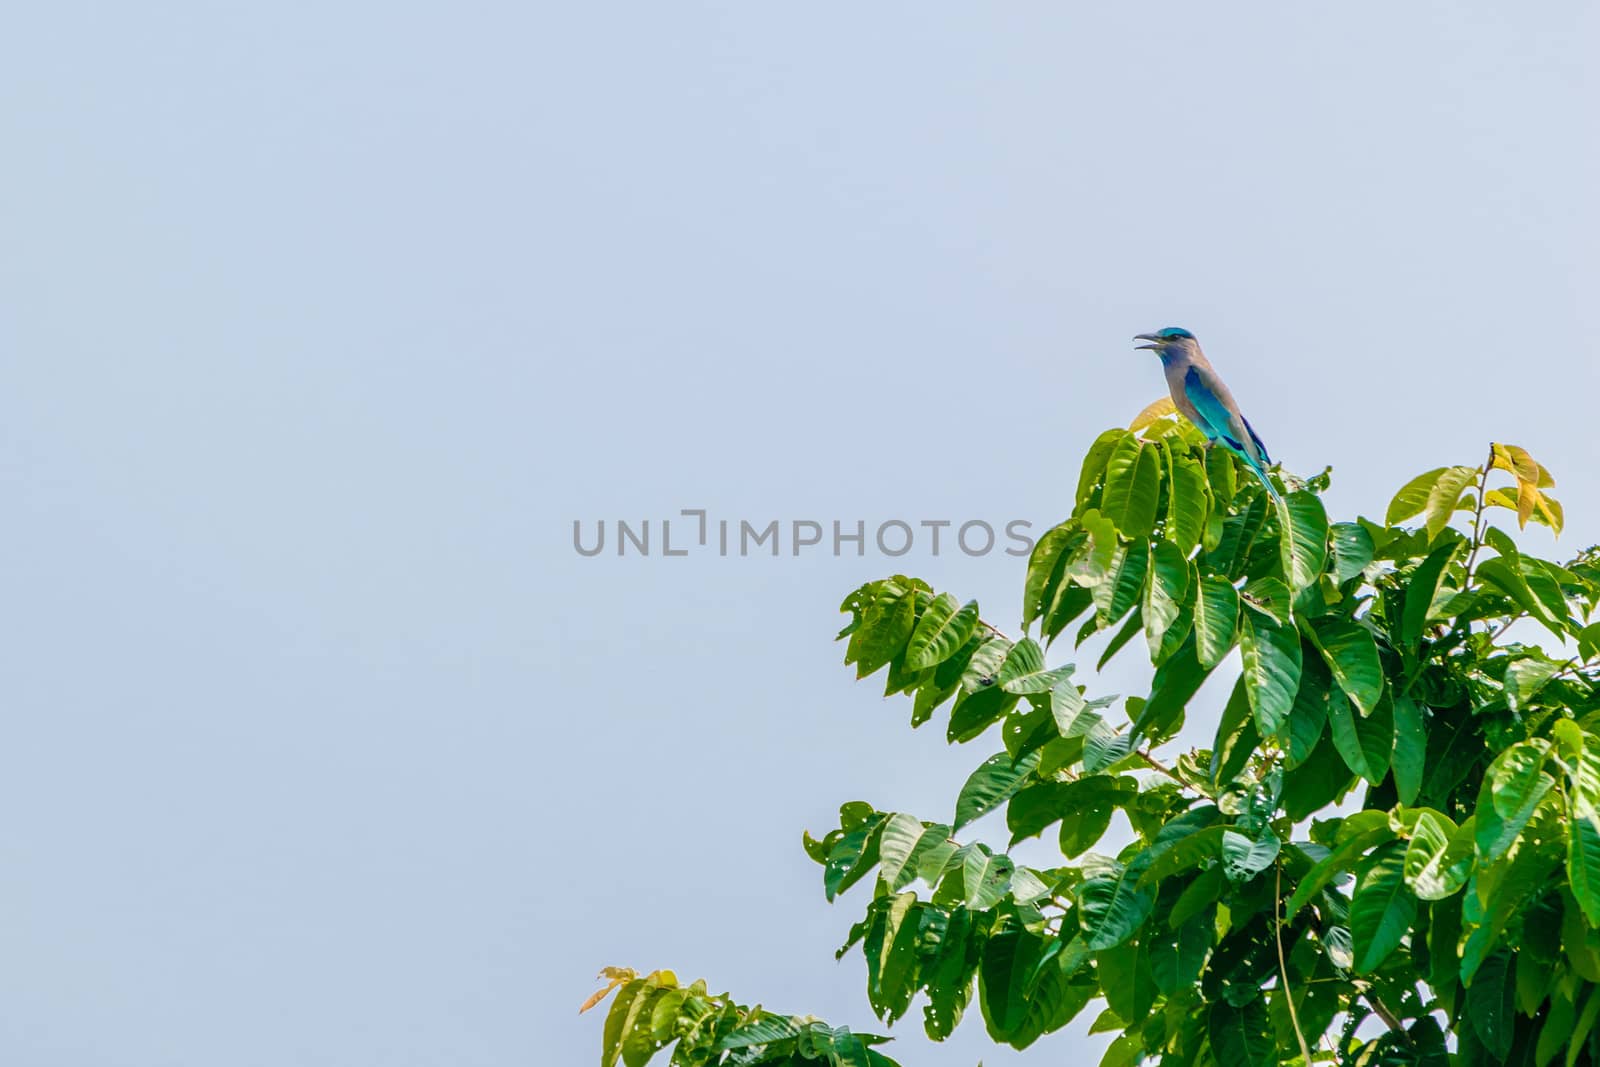 Bird on sitting on tree branch isolated. Wild himalayan cherry bird on flower tree. Summer Nature Background. Forest Scene. Close Up View Outdoors.